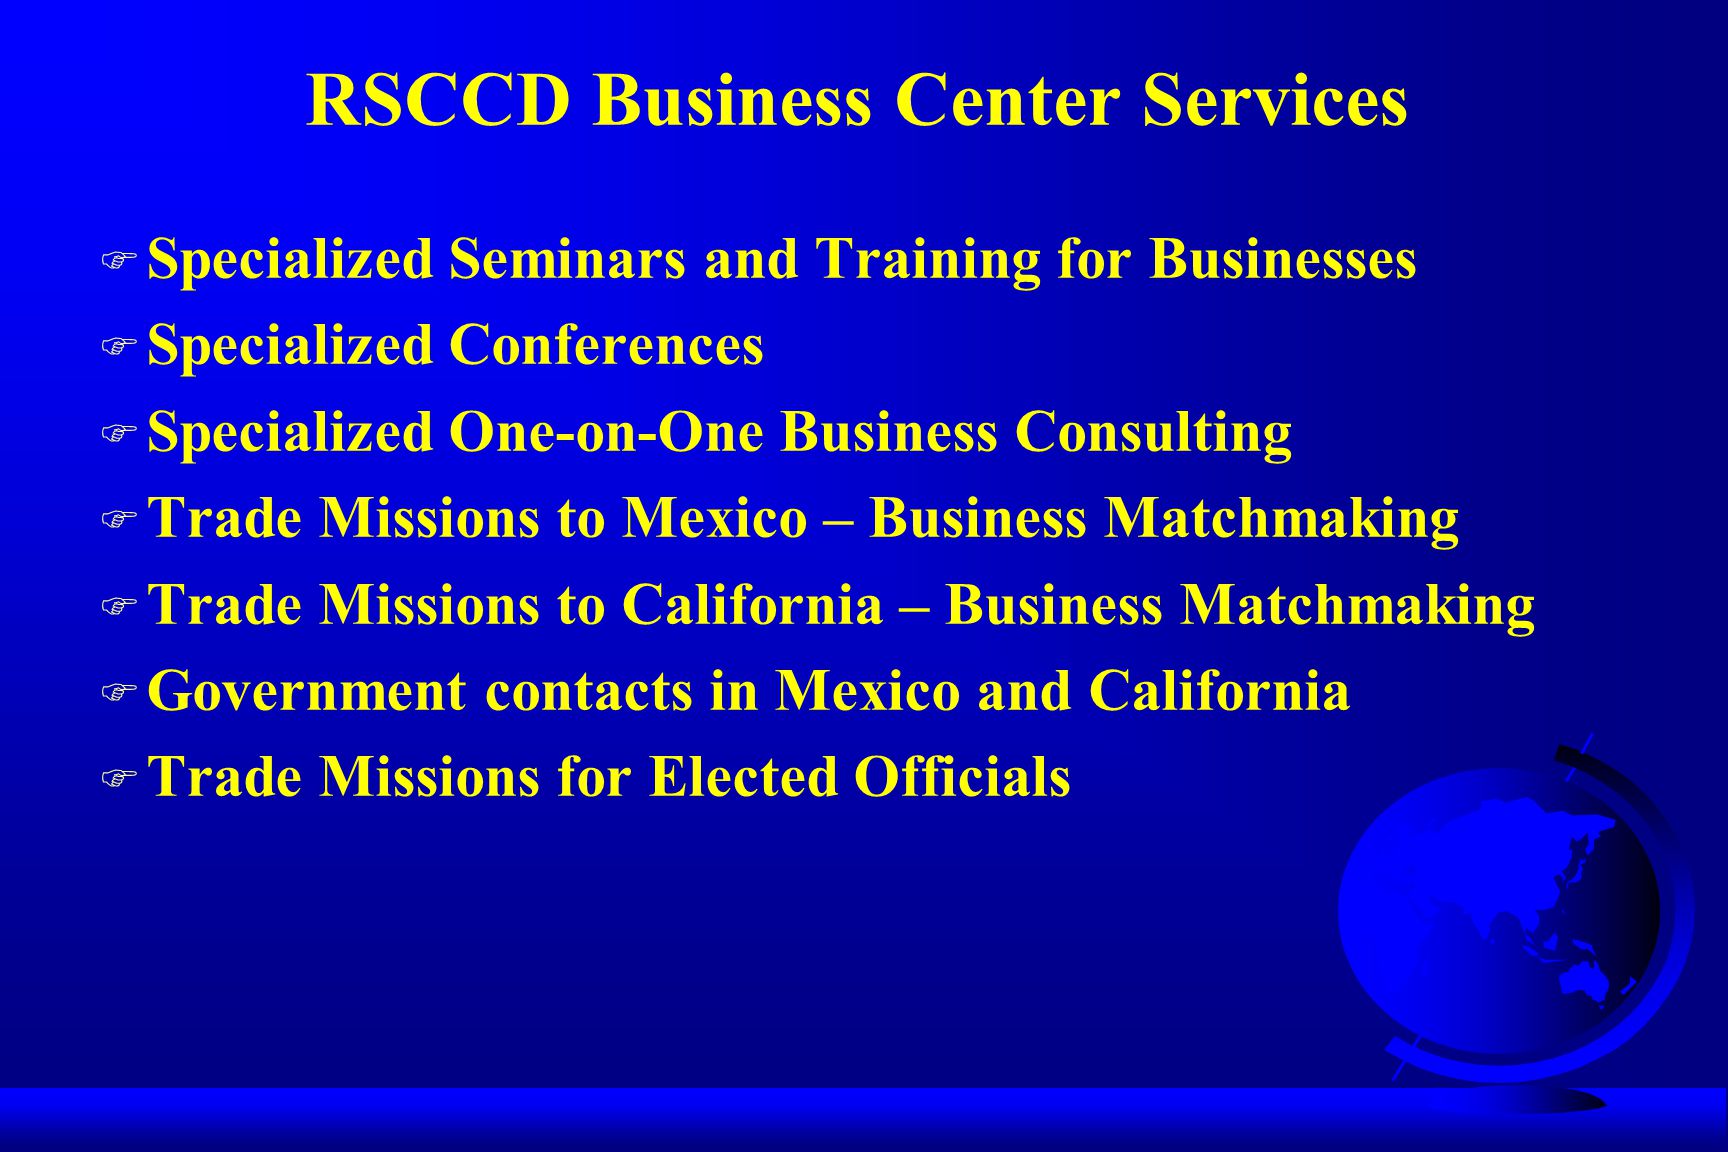 RSCCD Business Center Services F Specialized Seminars and Training for Businesses F Specialized Conferences F Specialized One-on-One Business Consulting F Trade Missions to Mexico – Business Matchmaking F Trade Missions to California – Business Matchmaking F Government contacts in Mexico and California F Trade Missions for Elected Officials